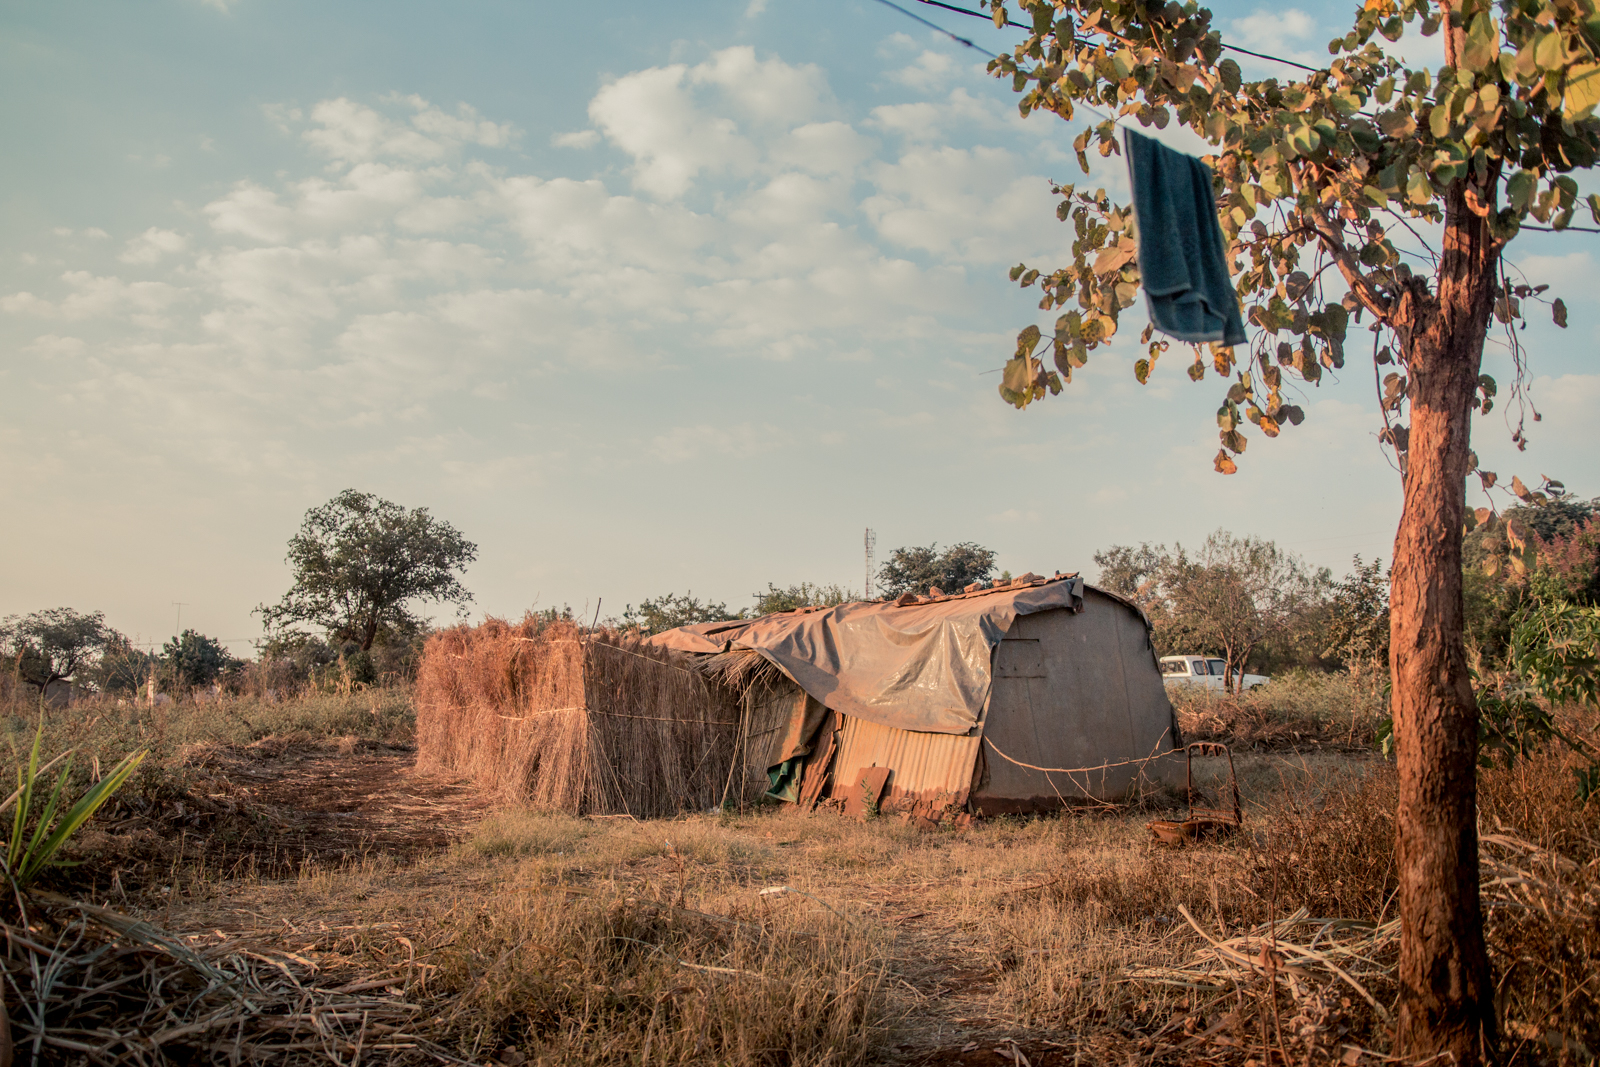  ZIMBABWE: [Home Visit] This is Patricia's home. A small hut made almost entirely of grass/straw thatching and plastic tarp. Patricia's a widow who lives a couple hours outside town on an abandoned farm land. The landowner recently gave her a pay or 